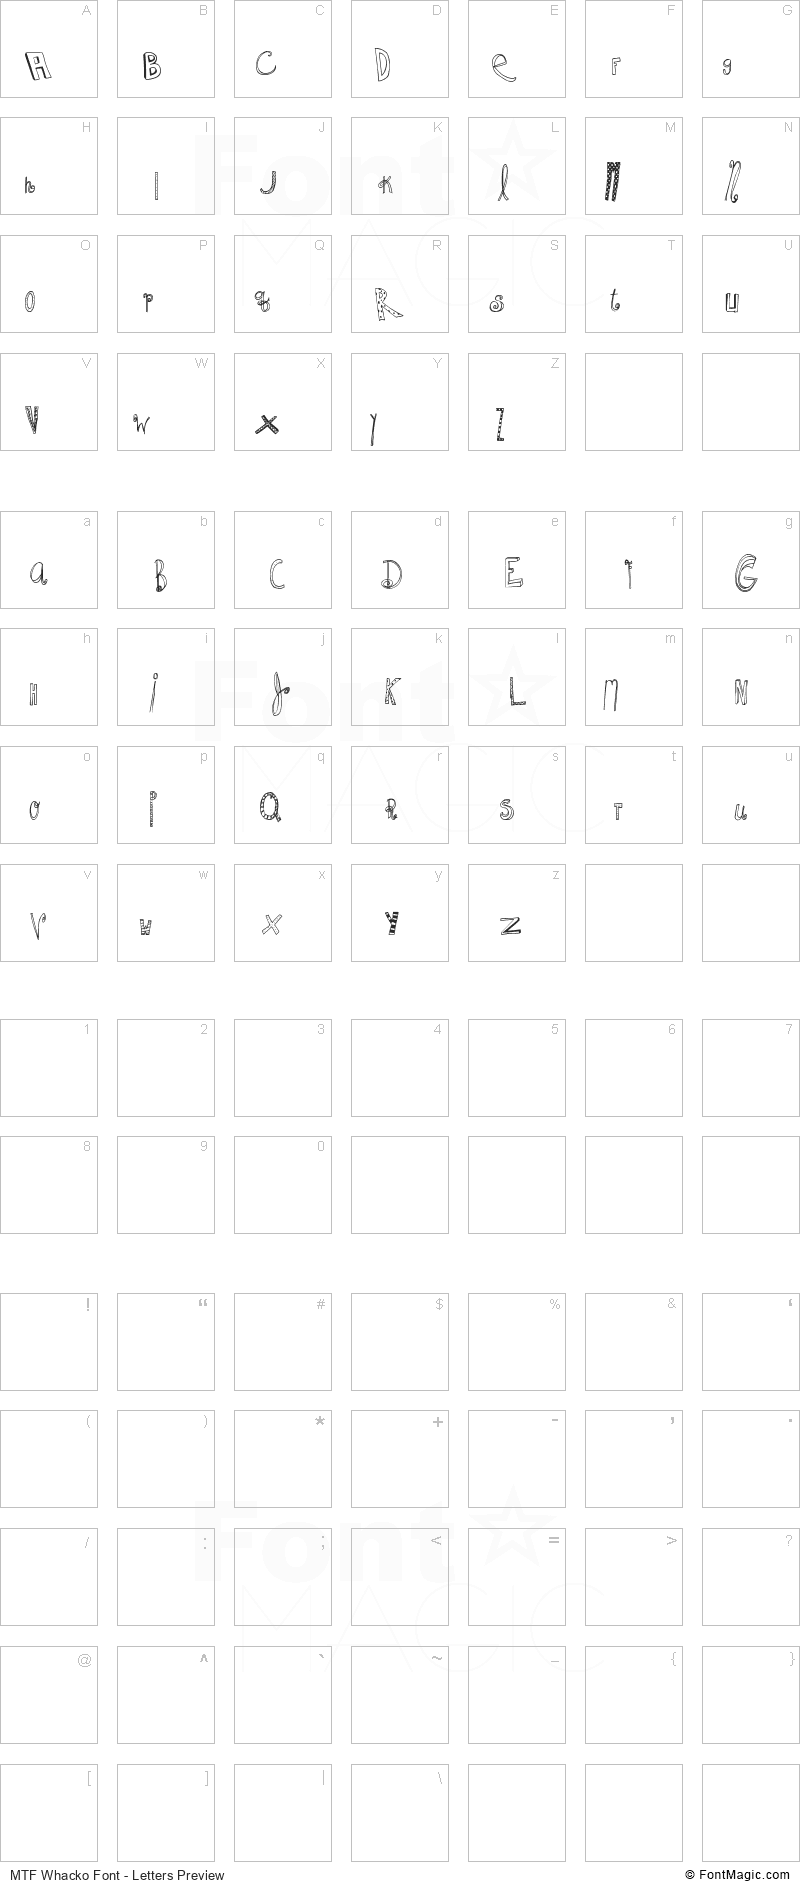 MTF Whacko Font - All Latters Preview Chart